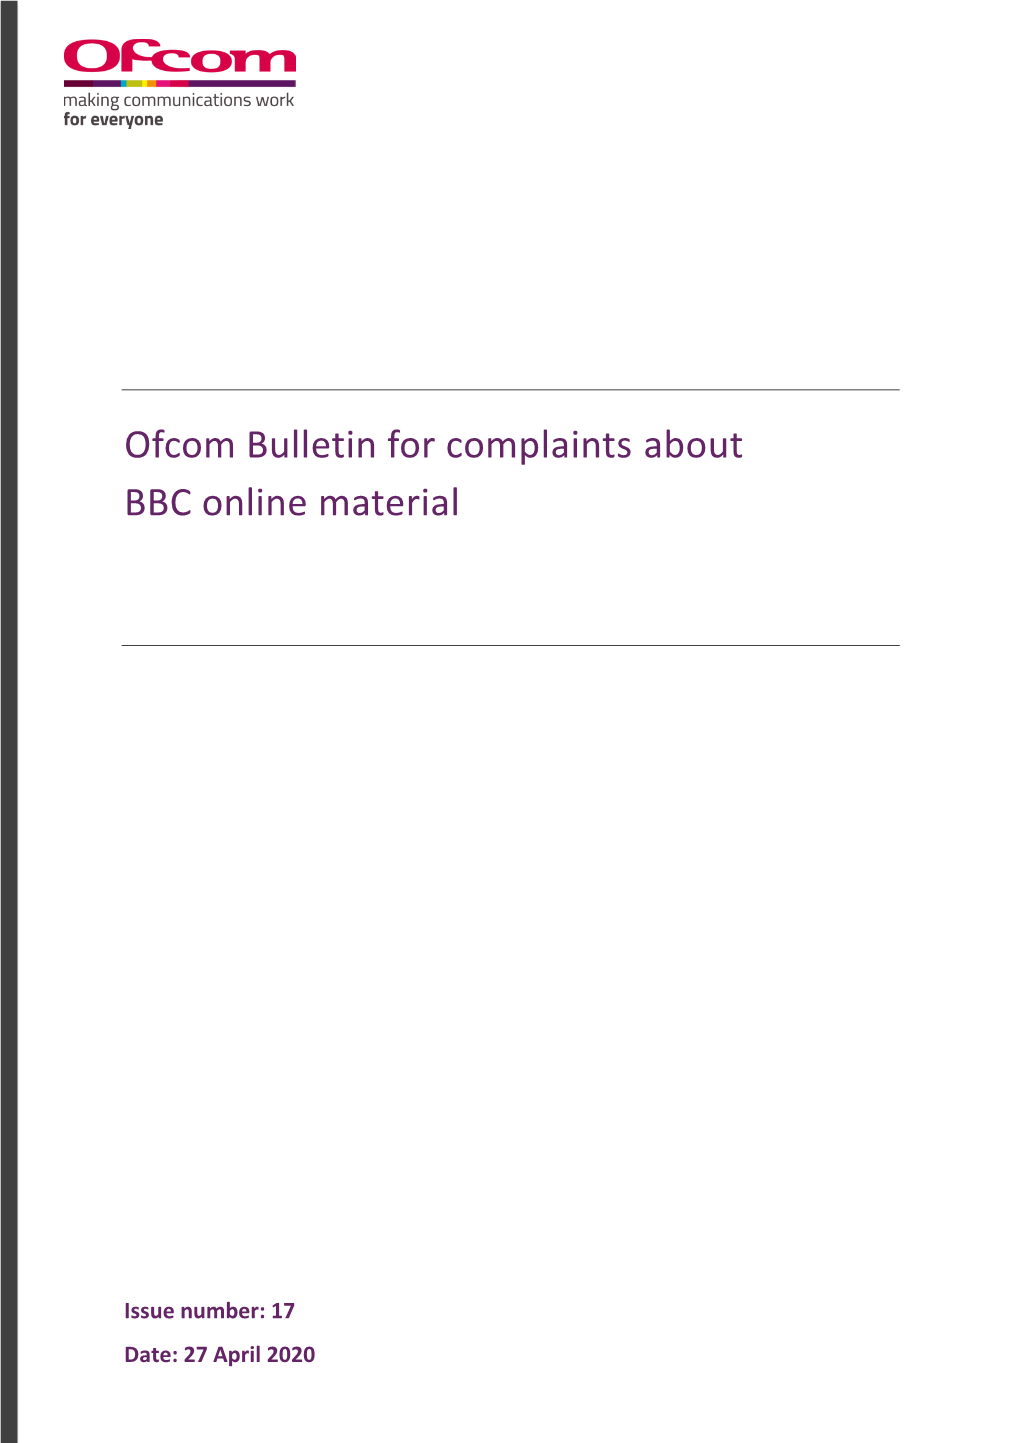 Bulletin for Complaints About BBC Online Material